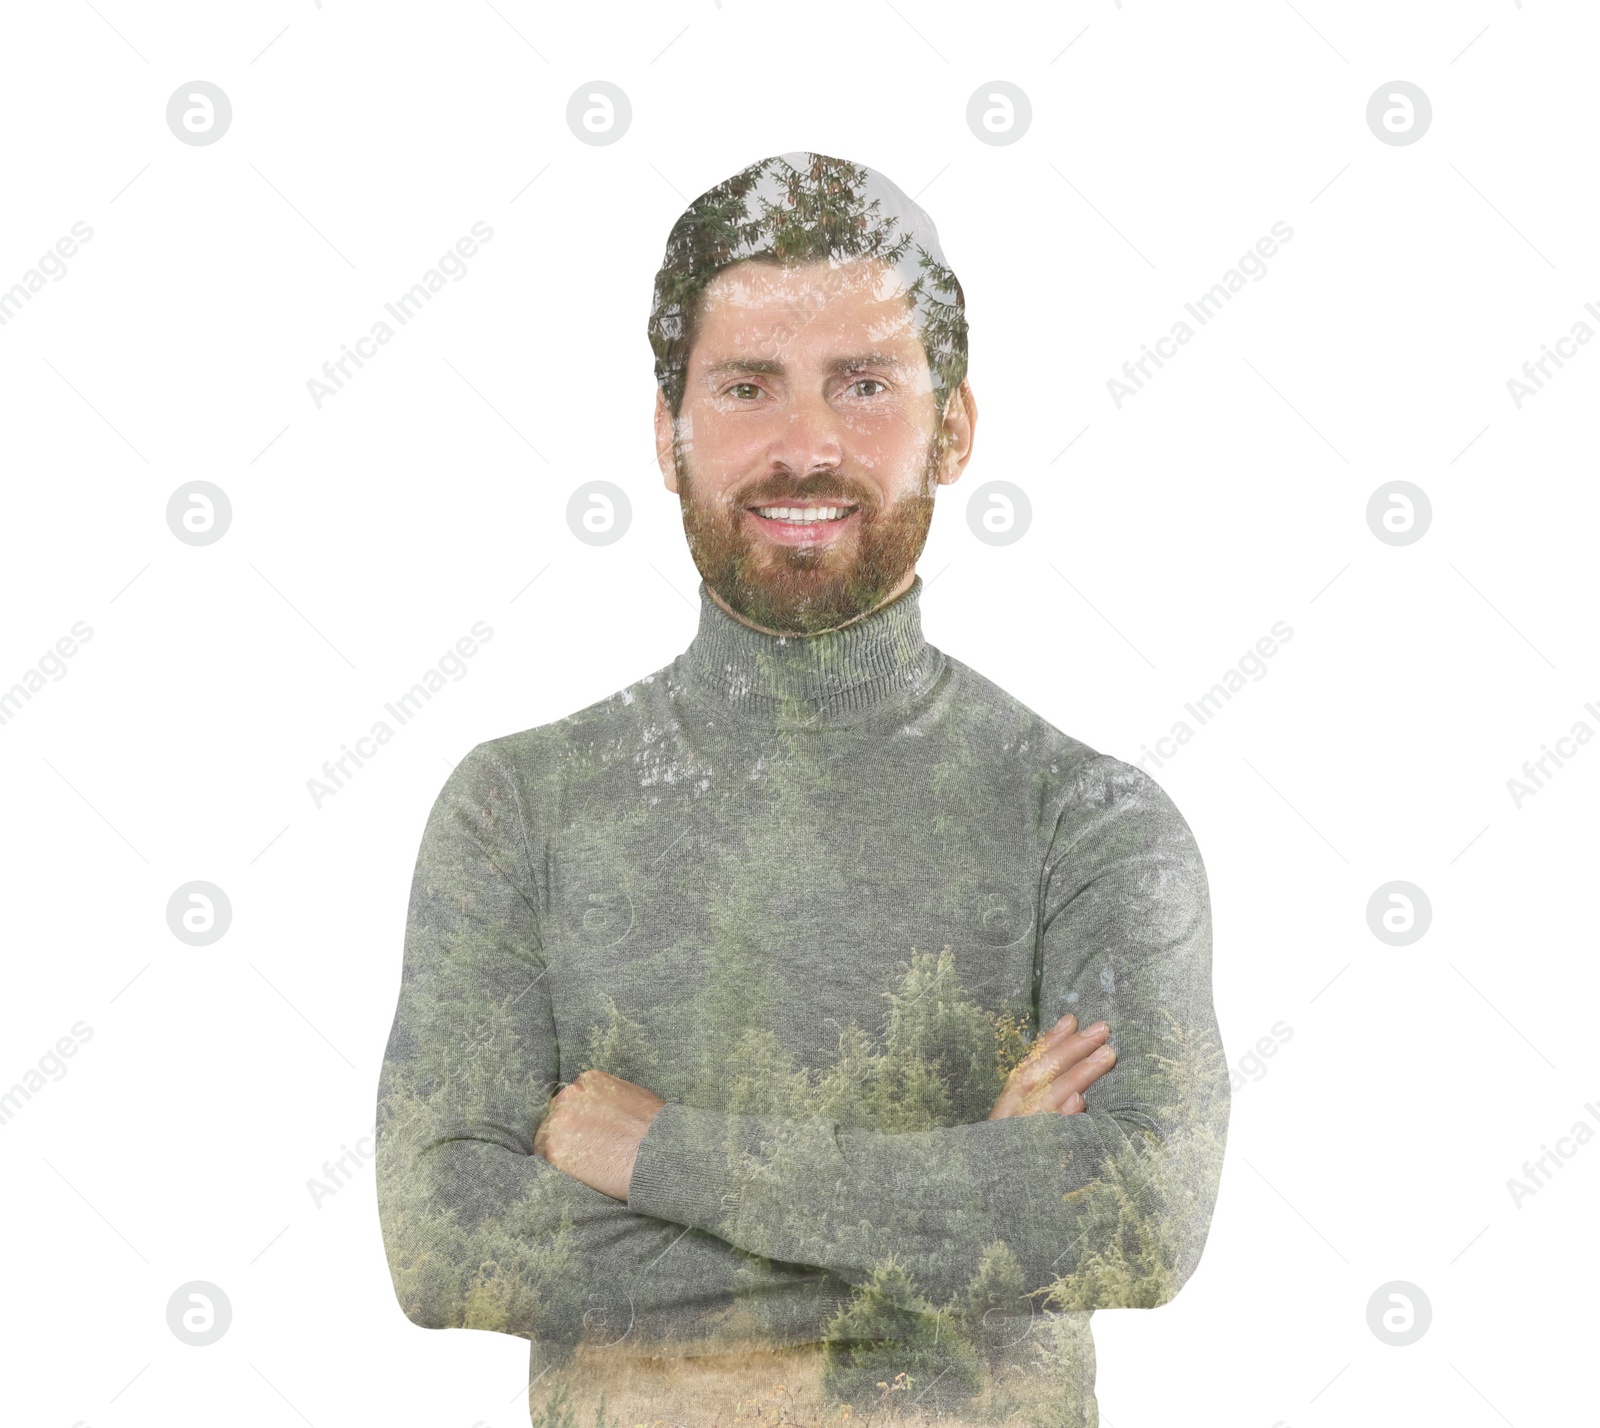 Image of Double exposure of man and trees on white background